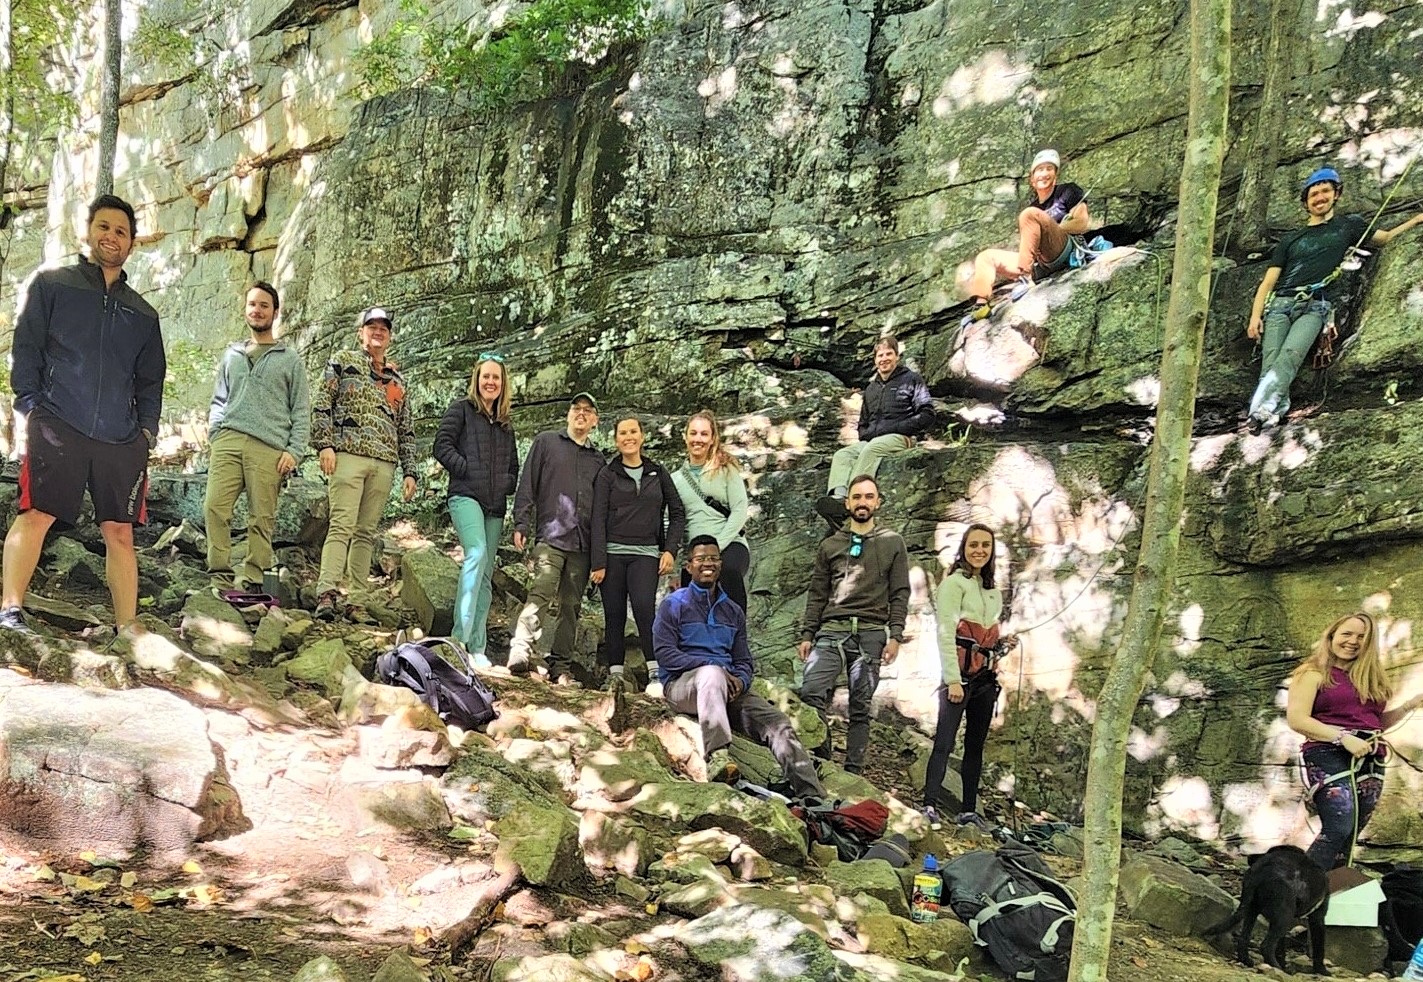 Residents outdoors on the side of a stony outcrop during a didactic session.